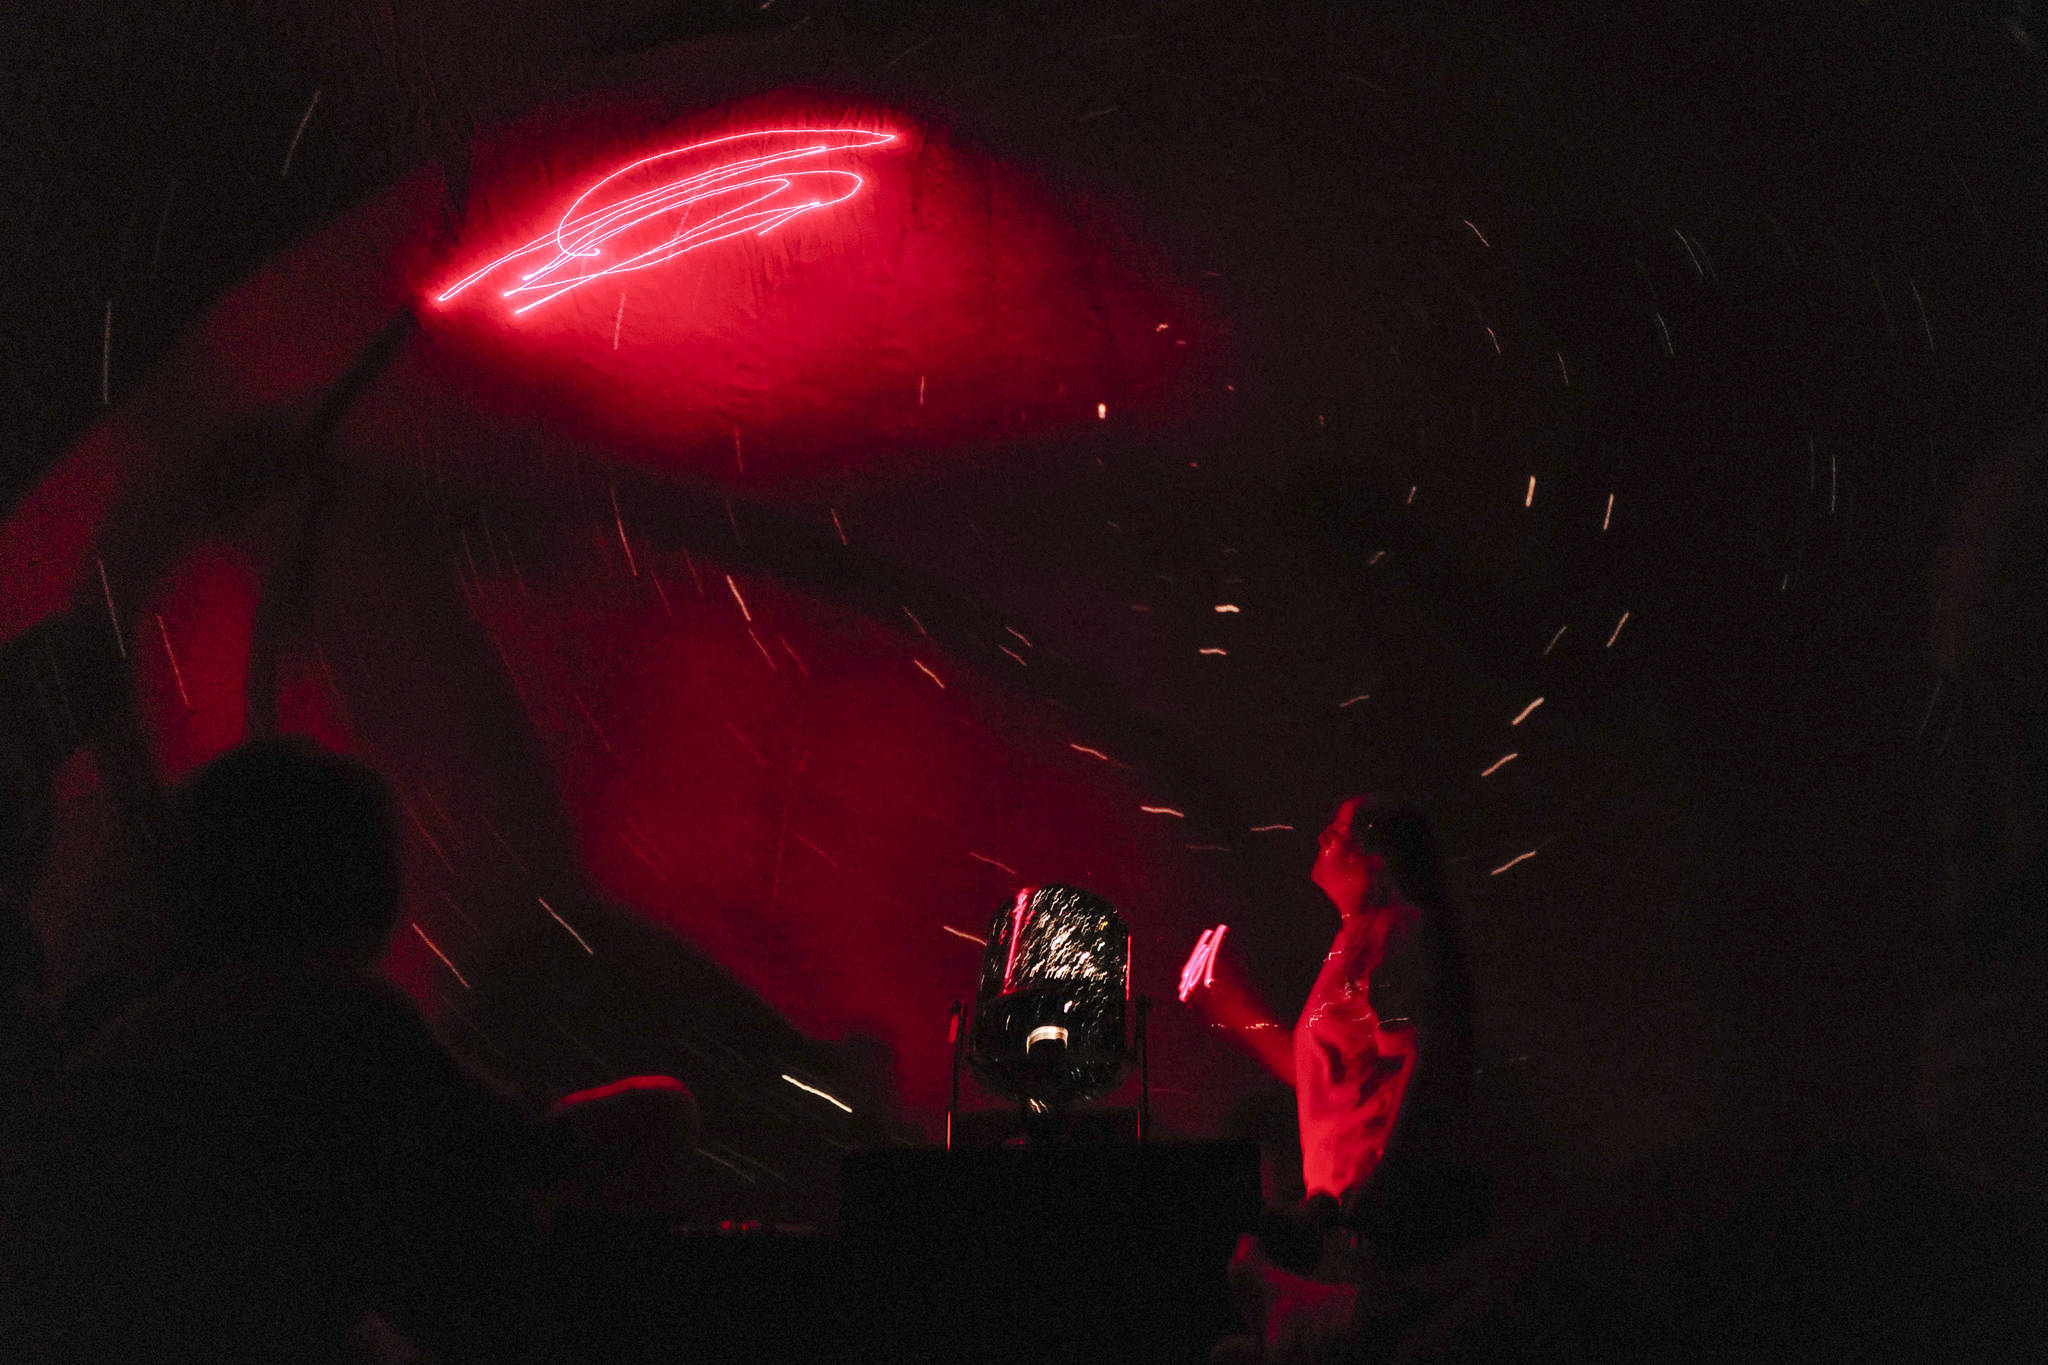 Rosemary Walling, a board member of the Marie Drake Planetarium, gives a presentation on the night sky inside a portable planetarium at the Alaska State Museum on Friday, July 5, 2019. (Michael Penn | Juneau Empire)